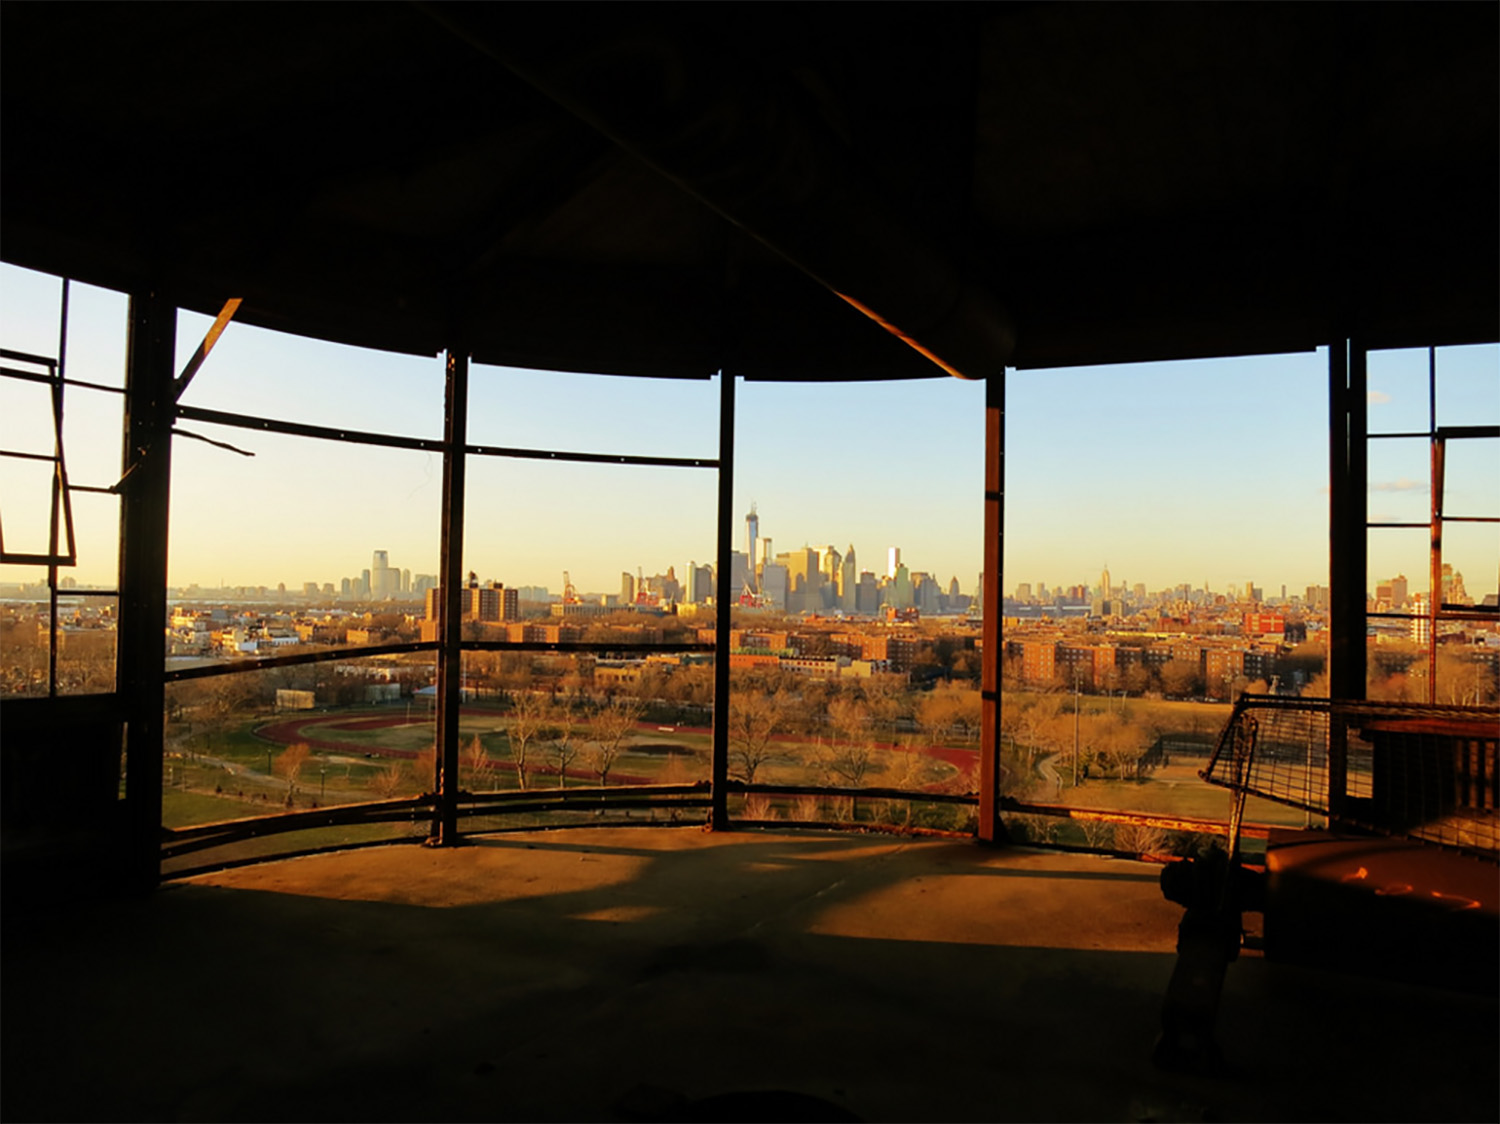 The view from the top floor of the abandoned Red Hook Grain Terminal. Photo by Hannah Frishberg